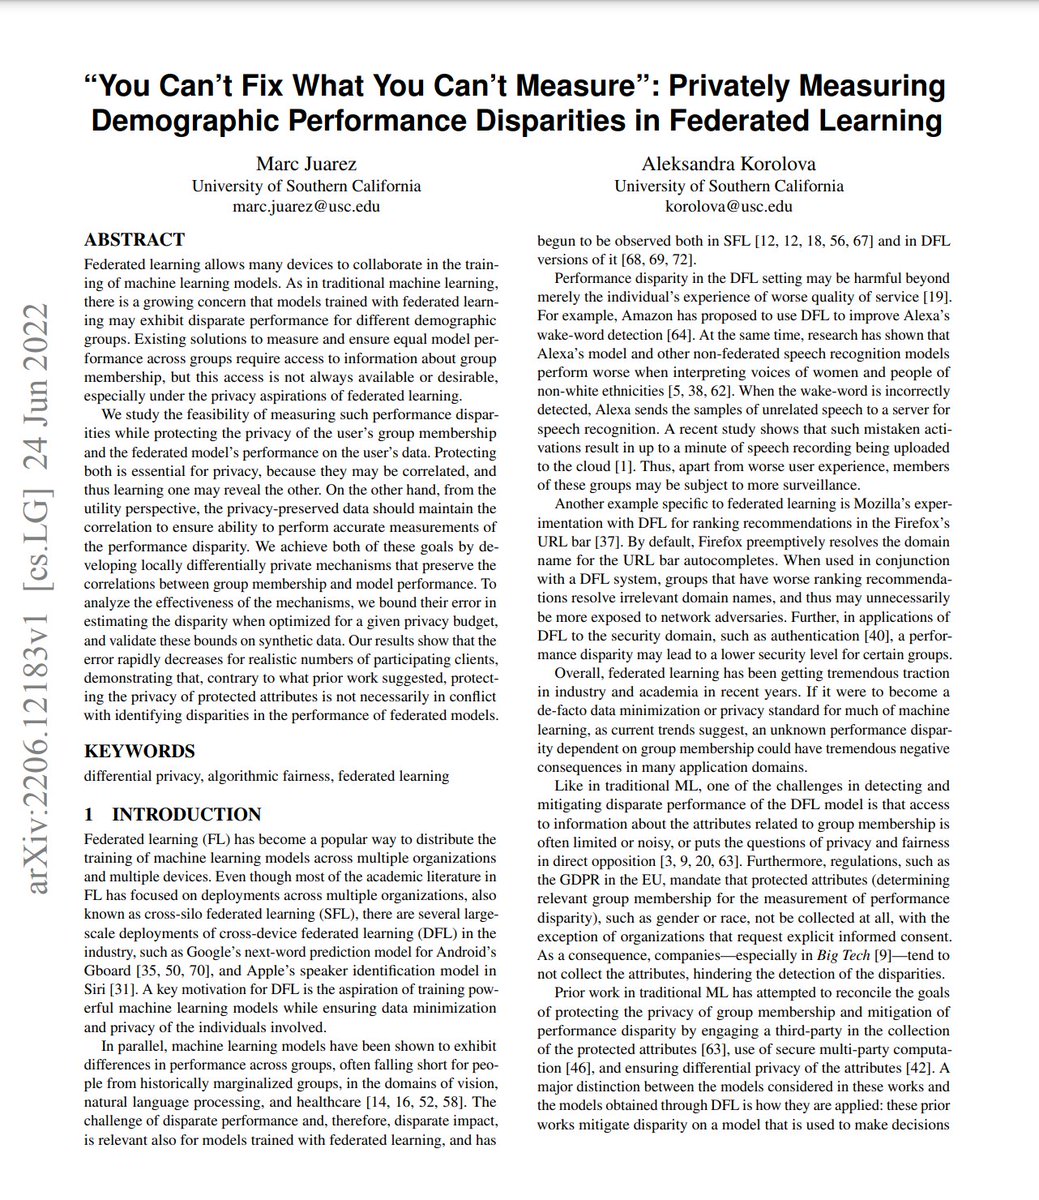 “You Can’t Fix What You Can’t Measure”—New work on Privately Measuring Demographic Performance Disparities in Federated Learning, presented today at #TPDP2022 (and in October at @ACMEAAMO): - Preprint: arxiv.org/abs/2206.12183 - 2-min talk: youtube.com/watch?v=6I6CCg… 1/8